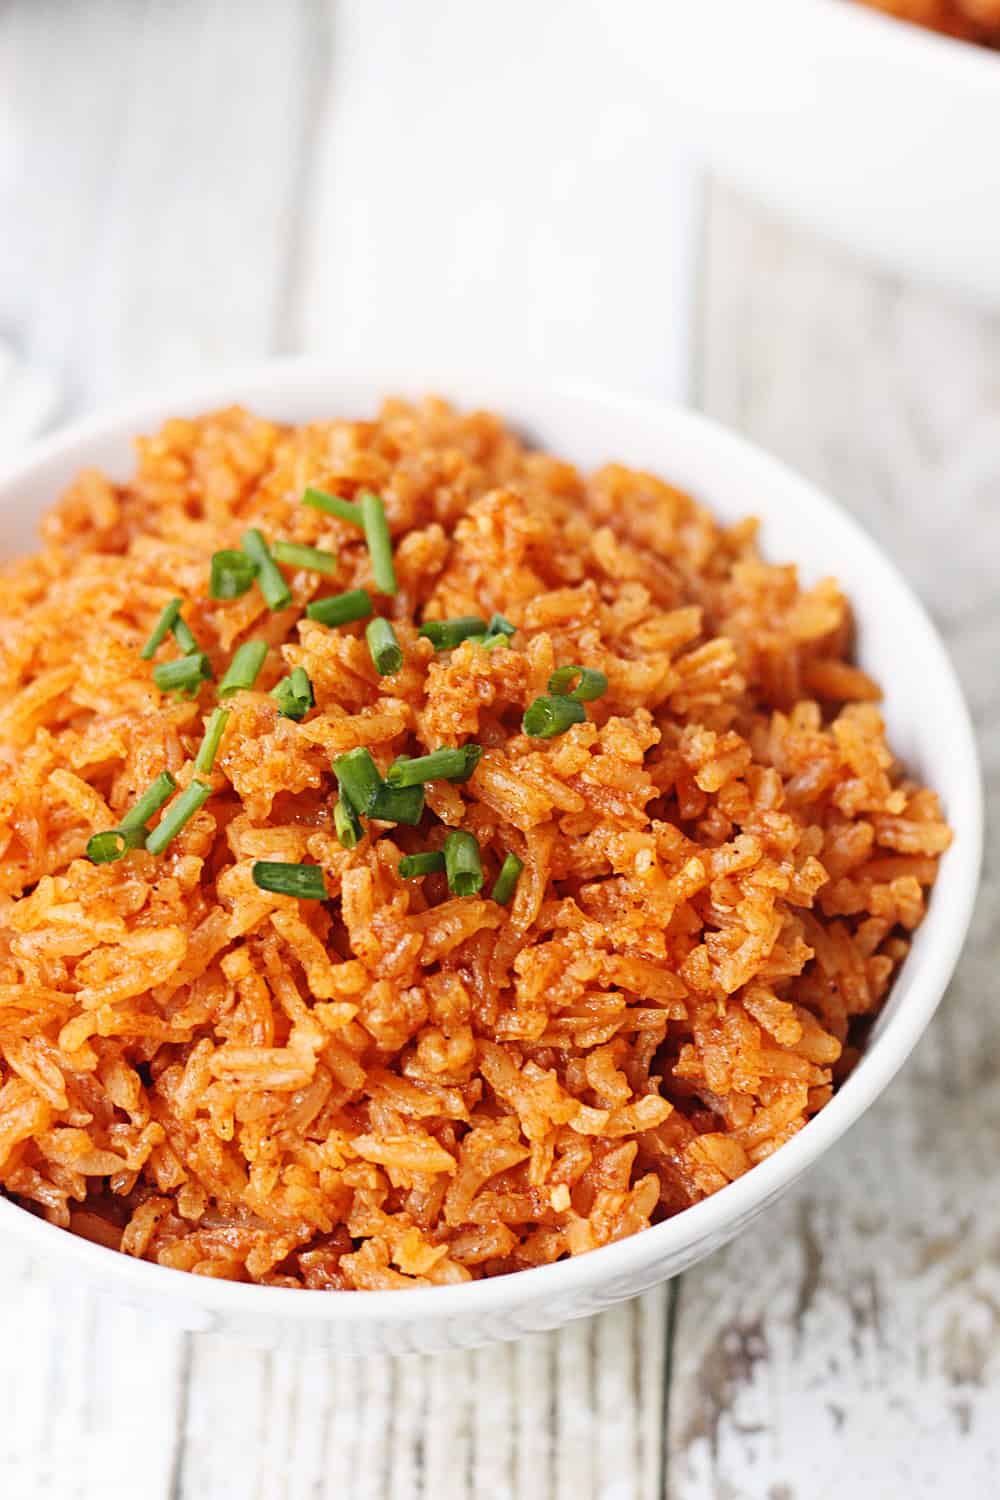 15 Best Ideas Spanish Rice with Minute Rice – How to Make Perfect Recipes